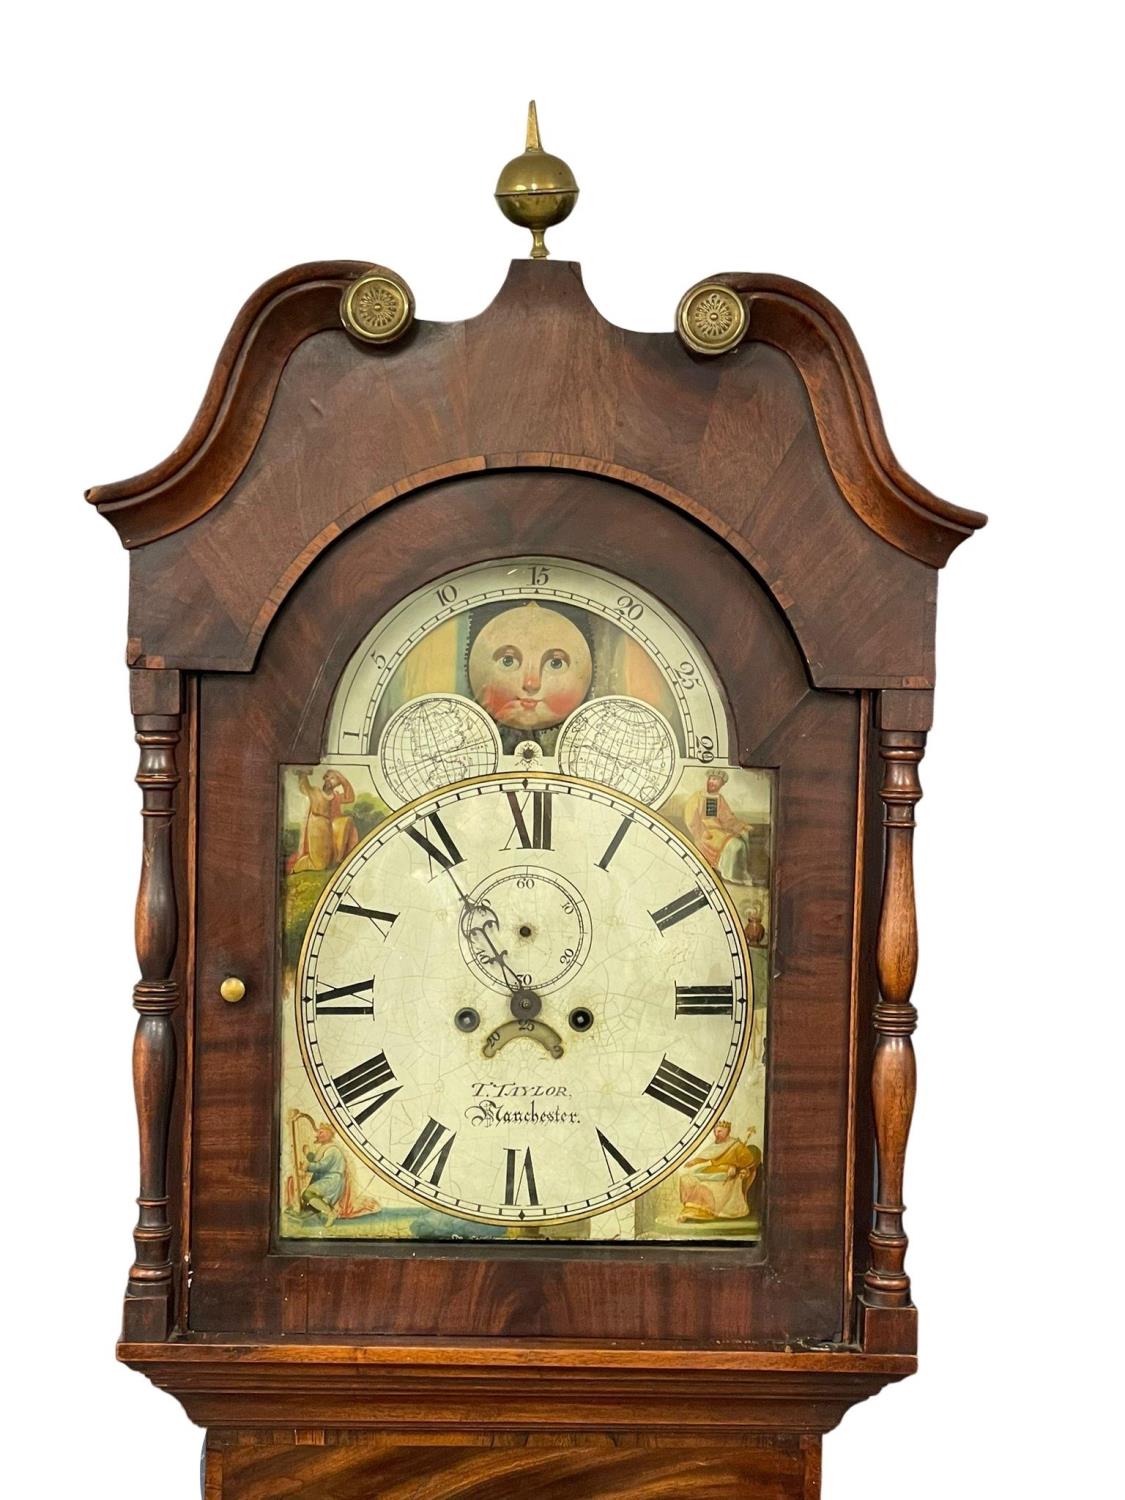 A large early Victorian mahogany long case clock with painted moon dial face. Circa 1835-1840. - Image 5 of 5